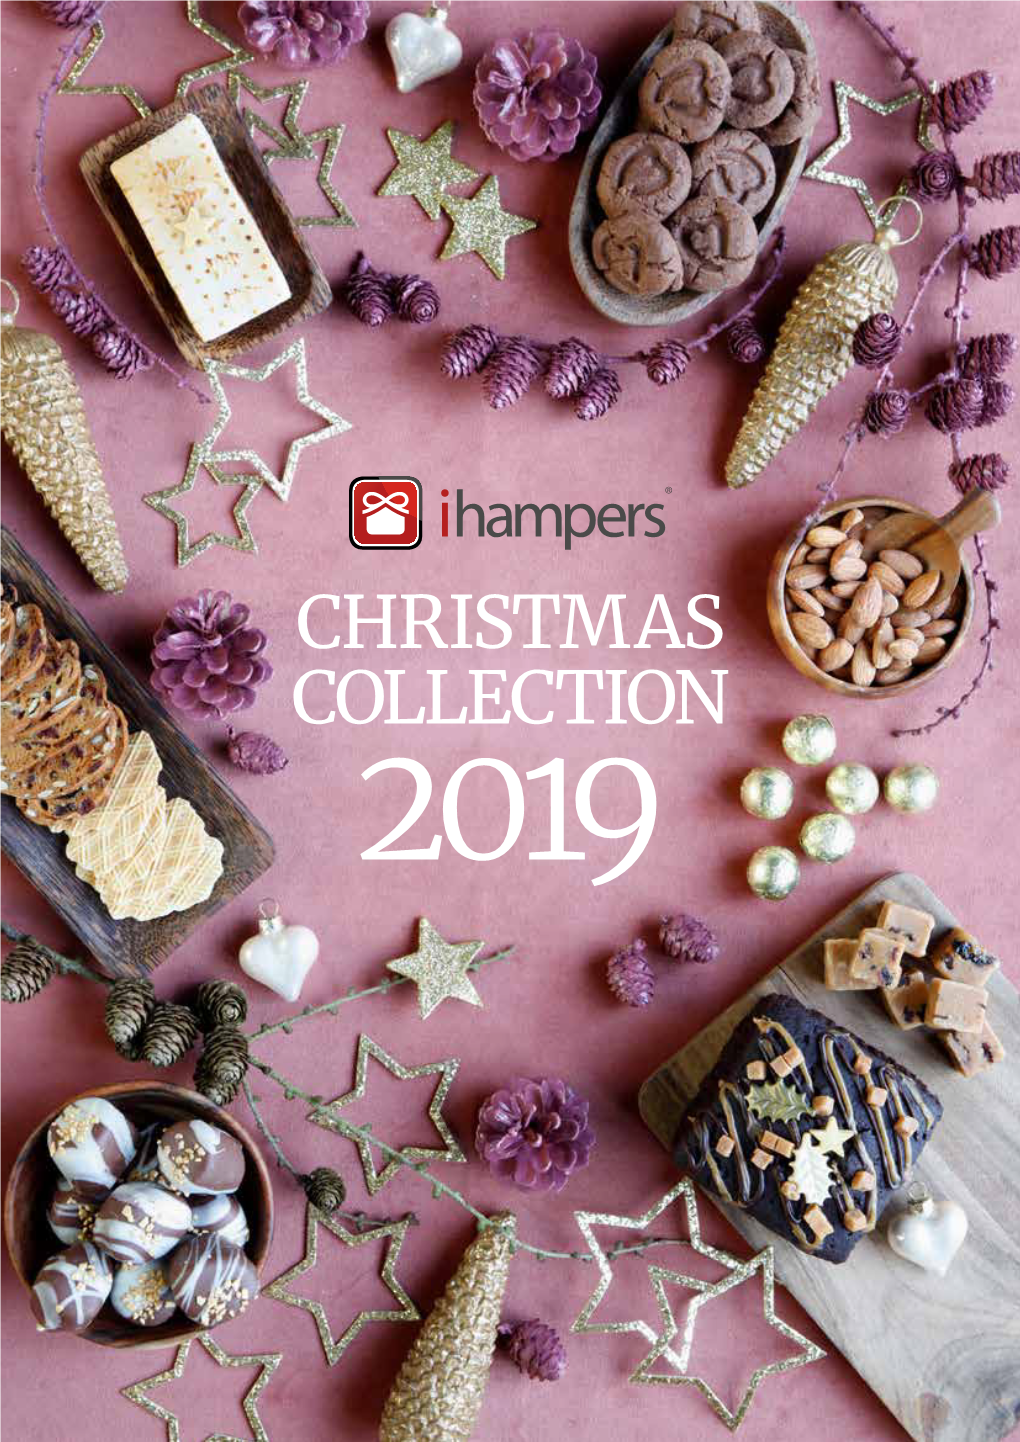 Christmas Collection 2019 Contents